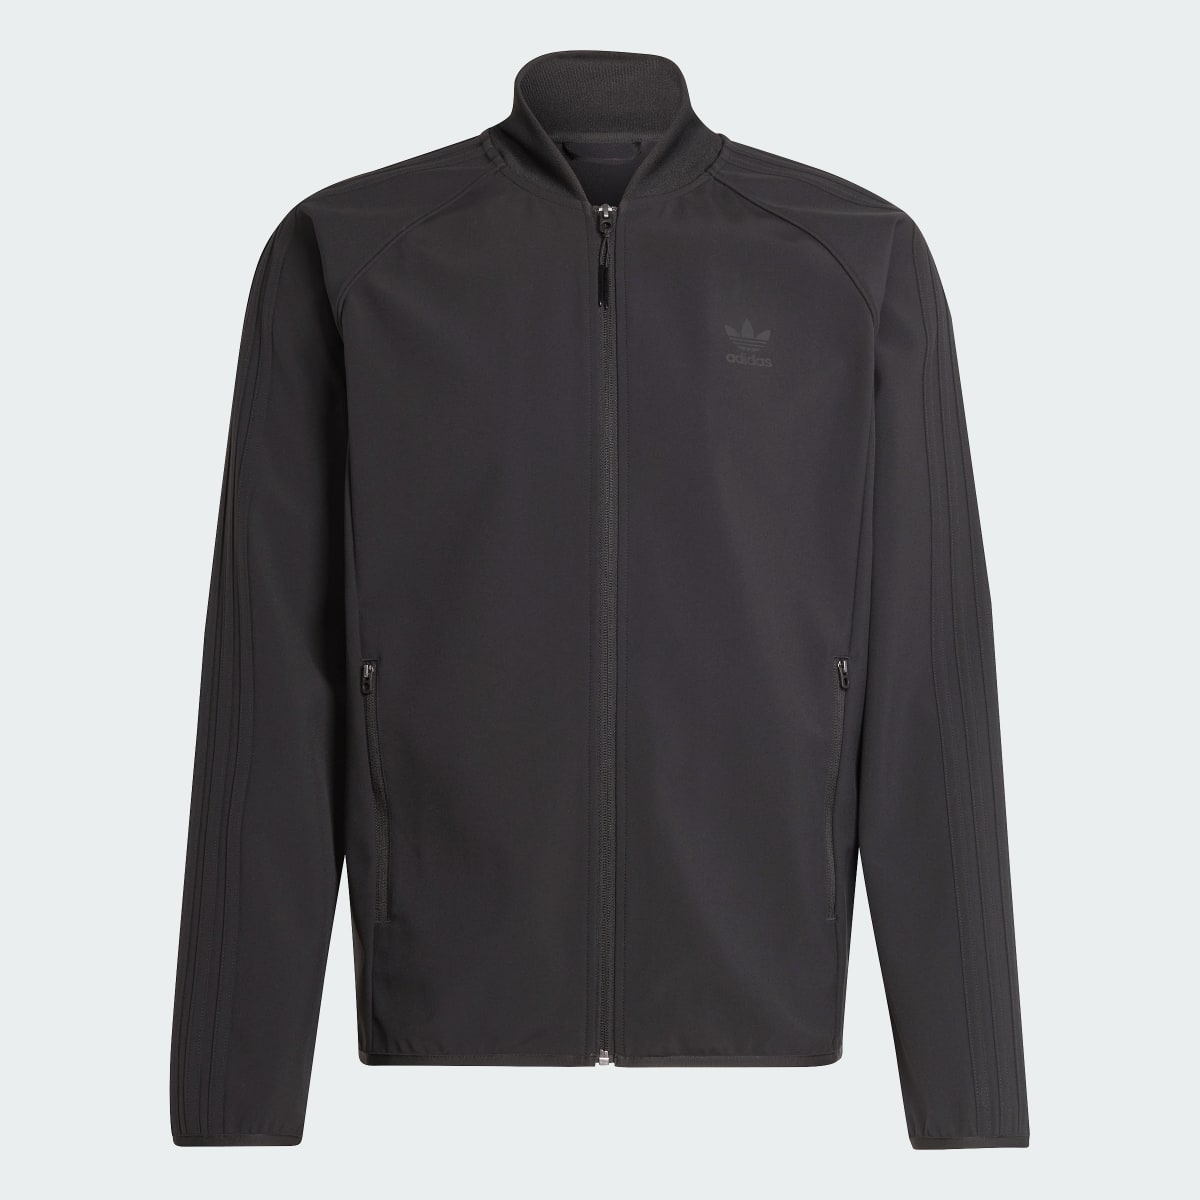 Adidas SST Bonded Track Top. 5